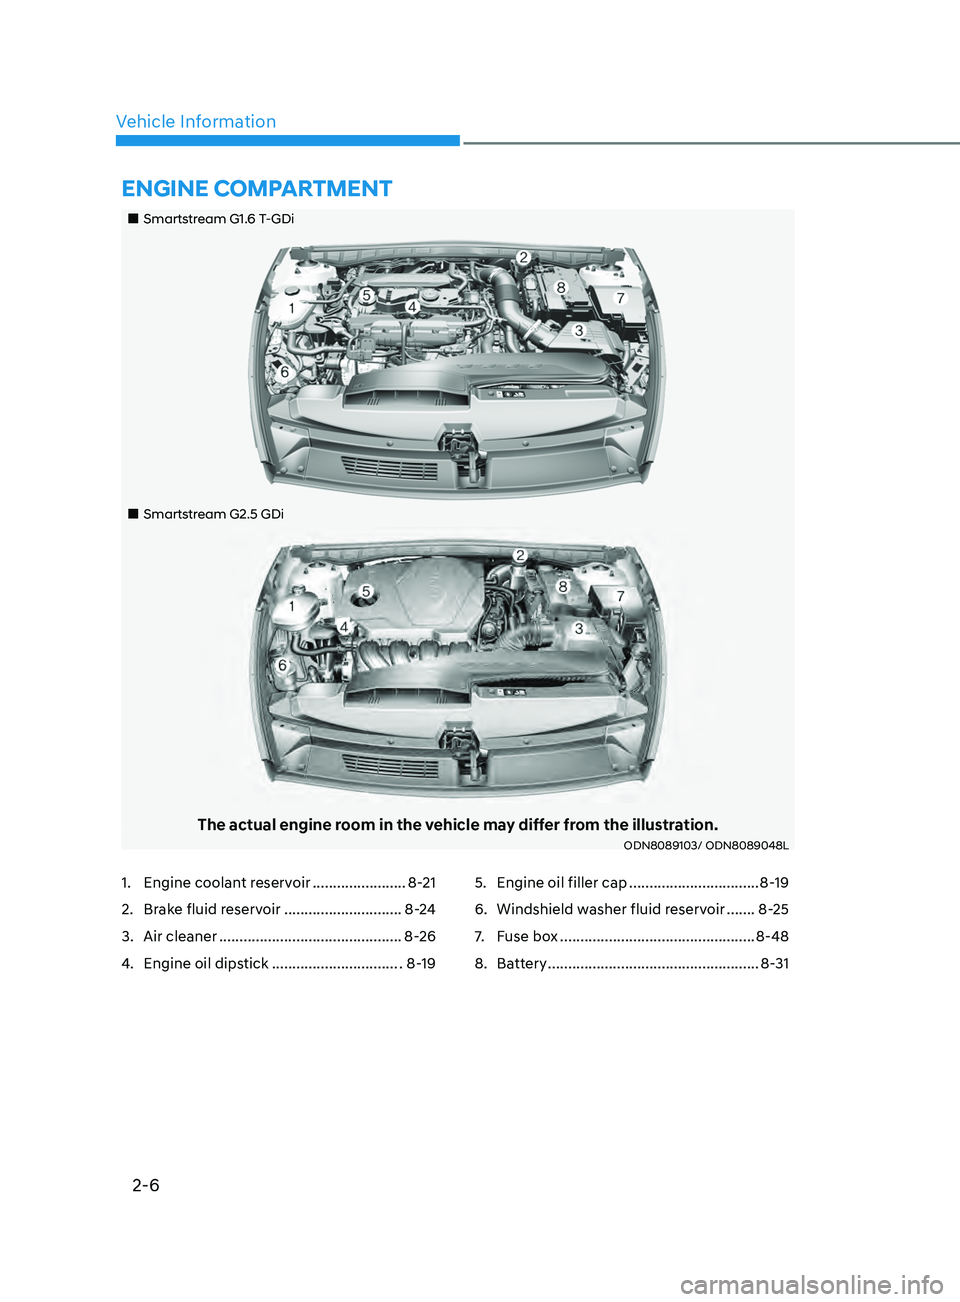 HYUNDAI SONATA LIMITED 2022  Owners Manual 2-6
Vehicle Information
„„Smartstream G1.6 T-GDi
„„Smartstream G2.5 GDi
The actual engine room in the vehicle may differ from the illustration.ODN8089103/ ODN8089048L
EnginE ComPar